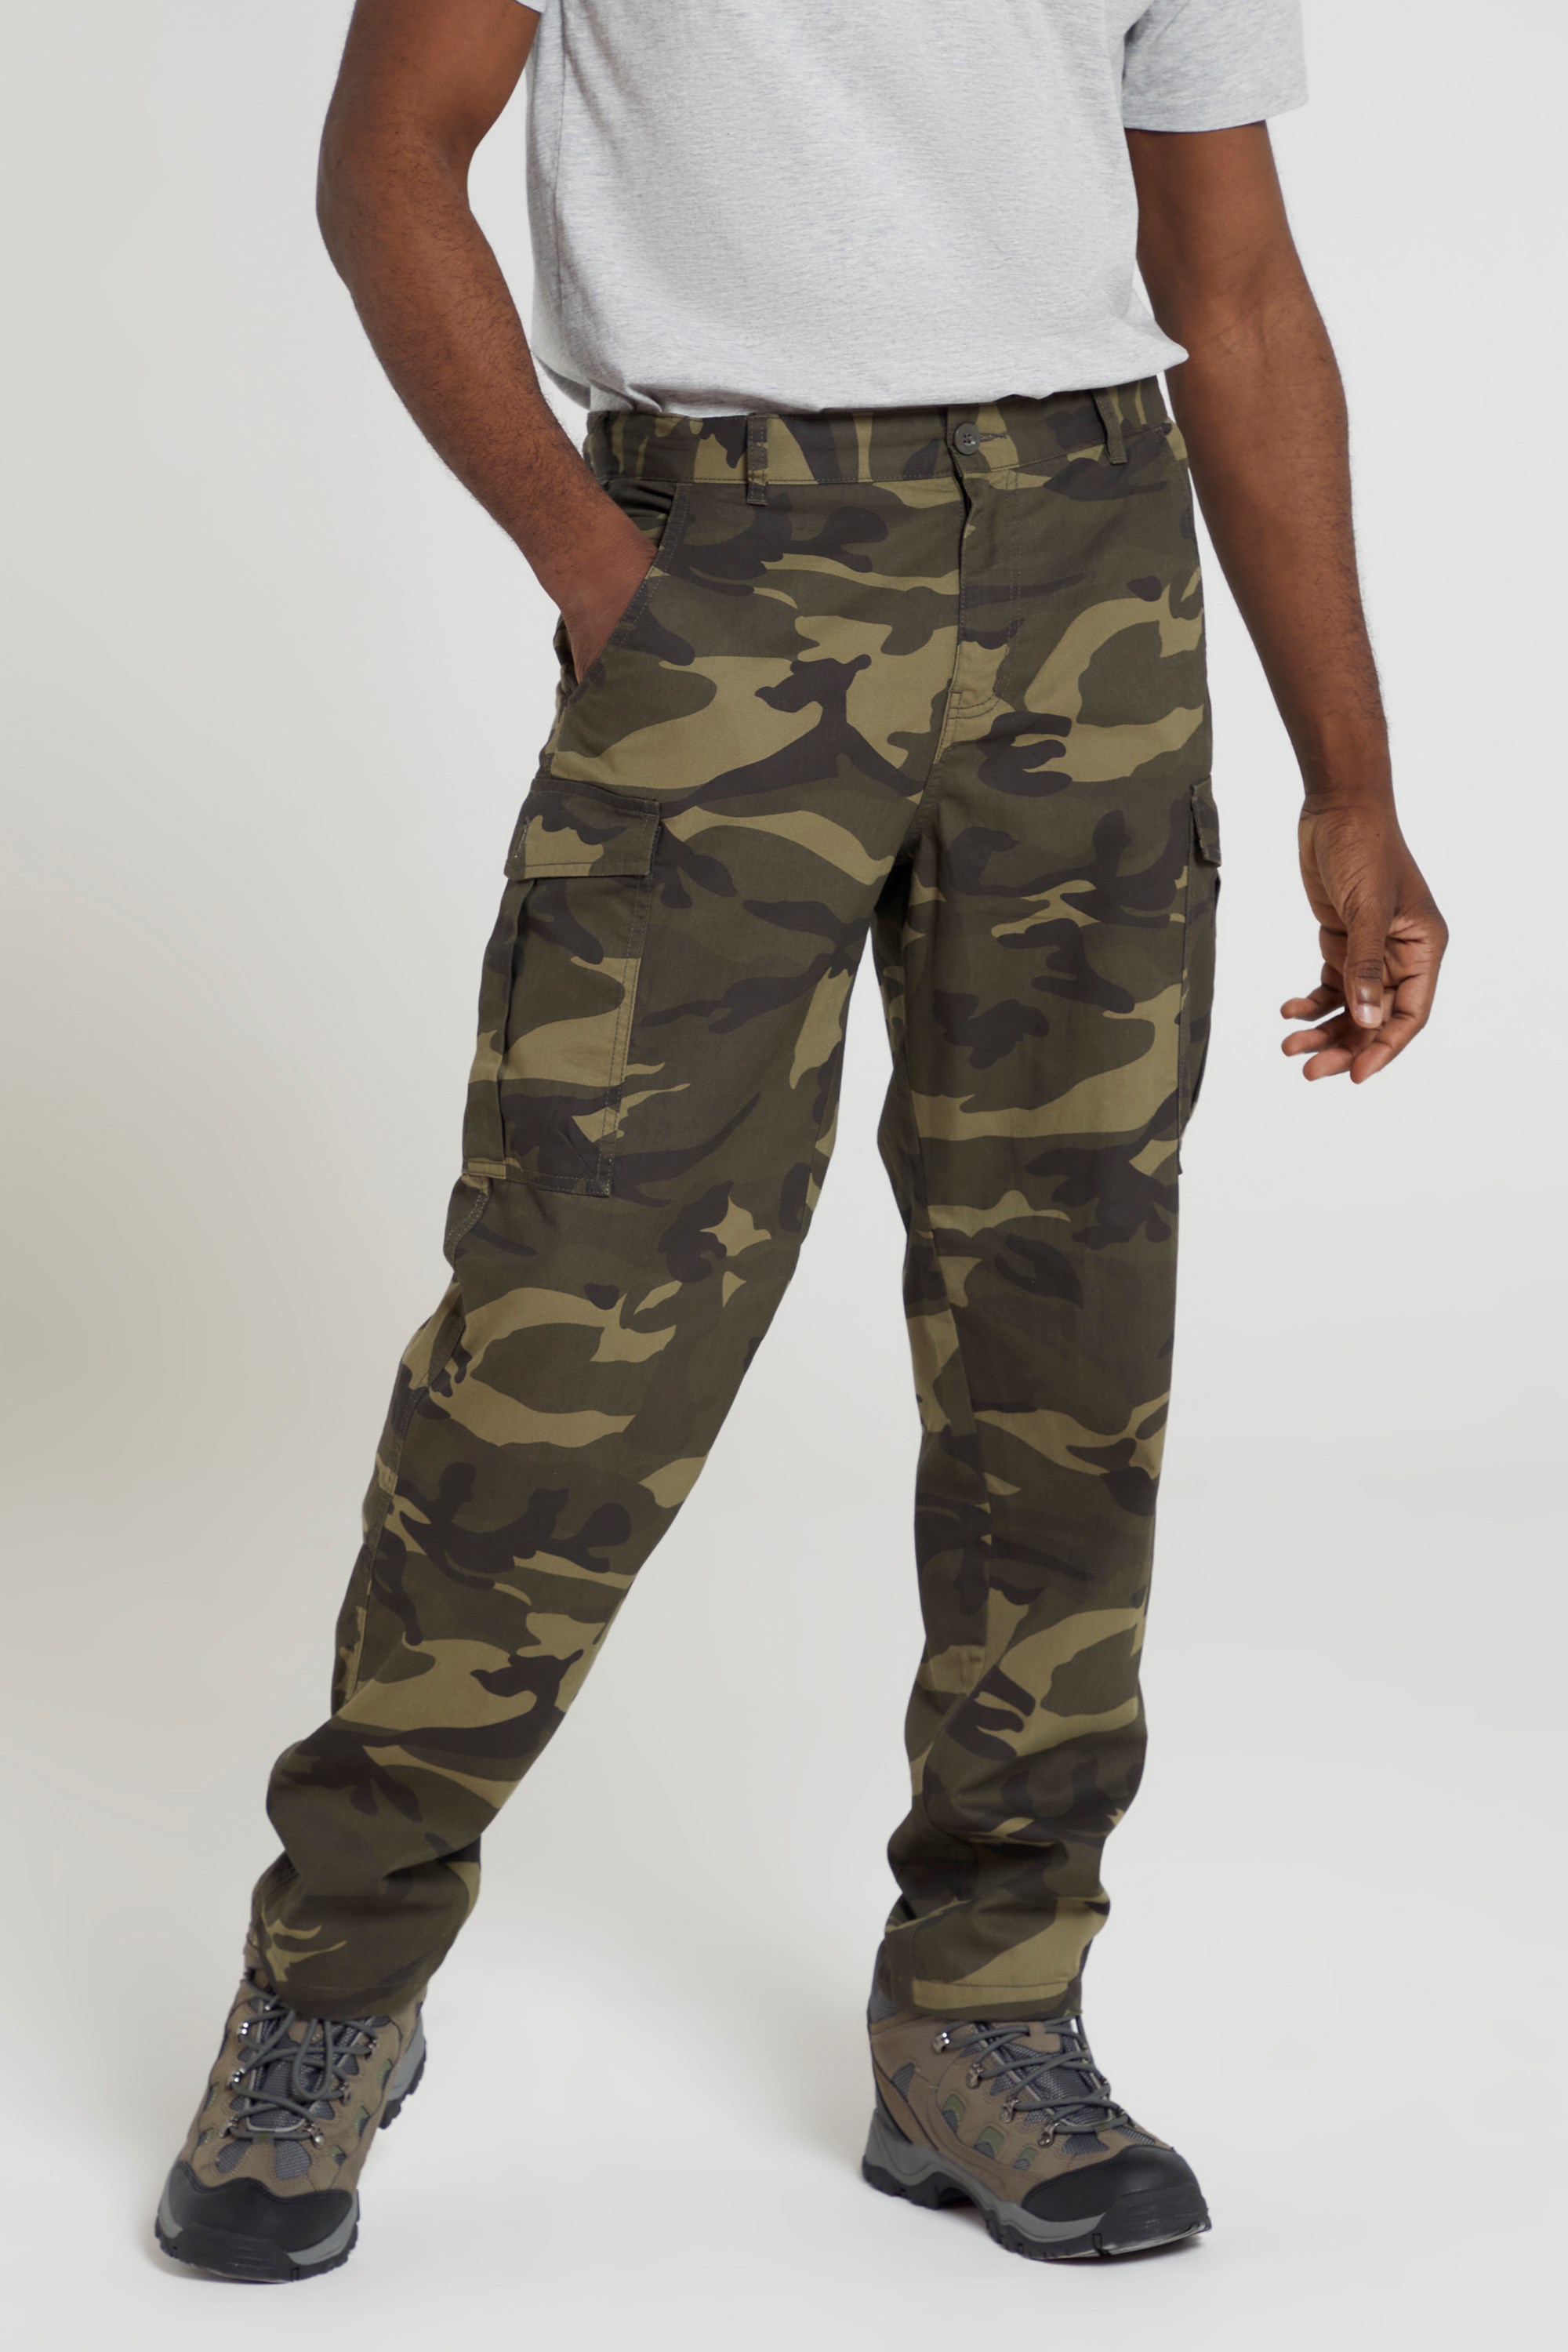 Multicolor Polystercotton Camouflage Cargo Pant  Camouflage Fabric  Army  Uniform 240250